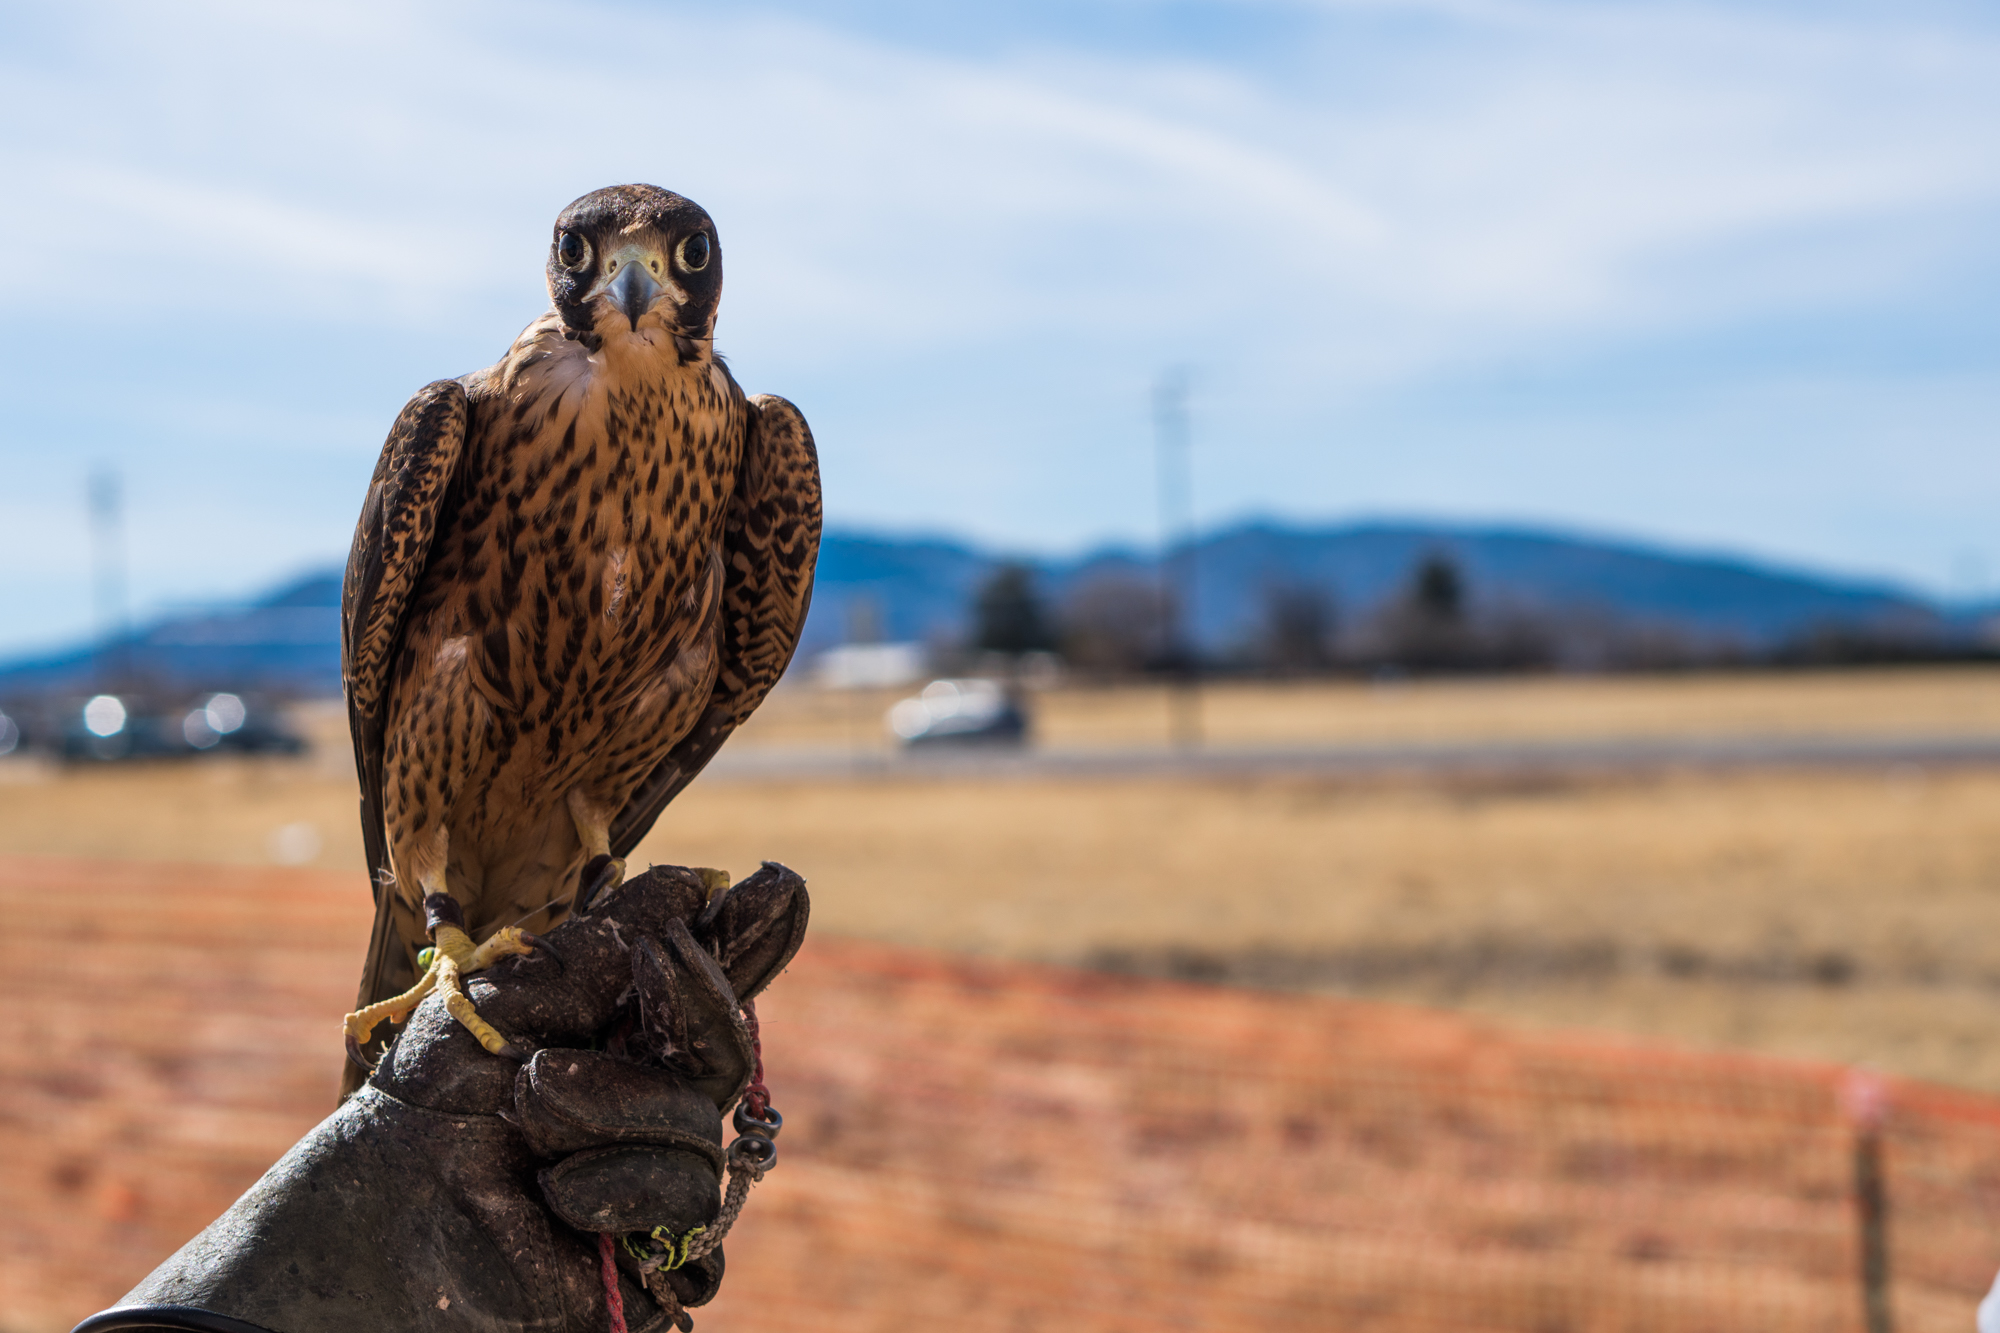 Soaring beauty: Arizona falconry takes flight in effort to promote conservation | The ...